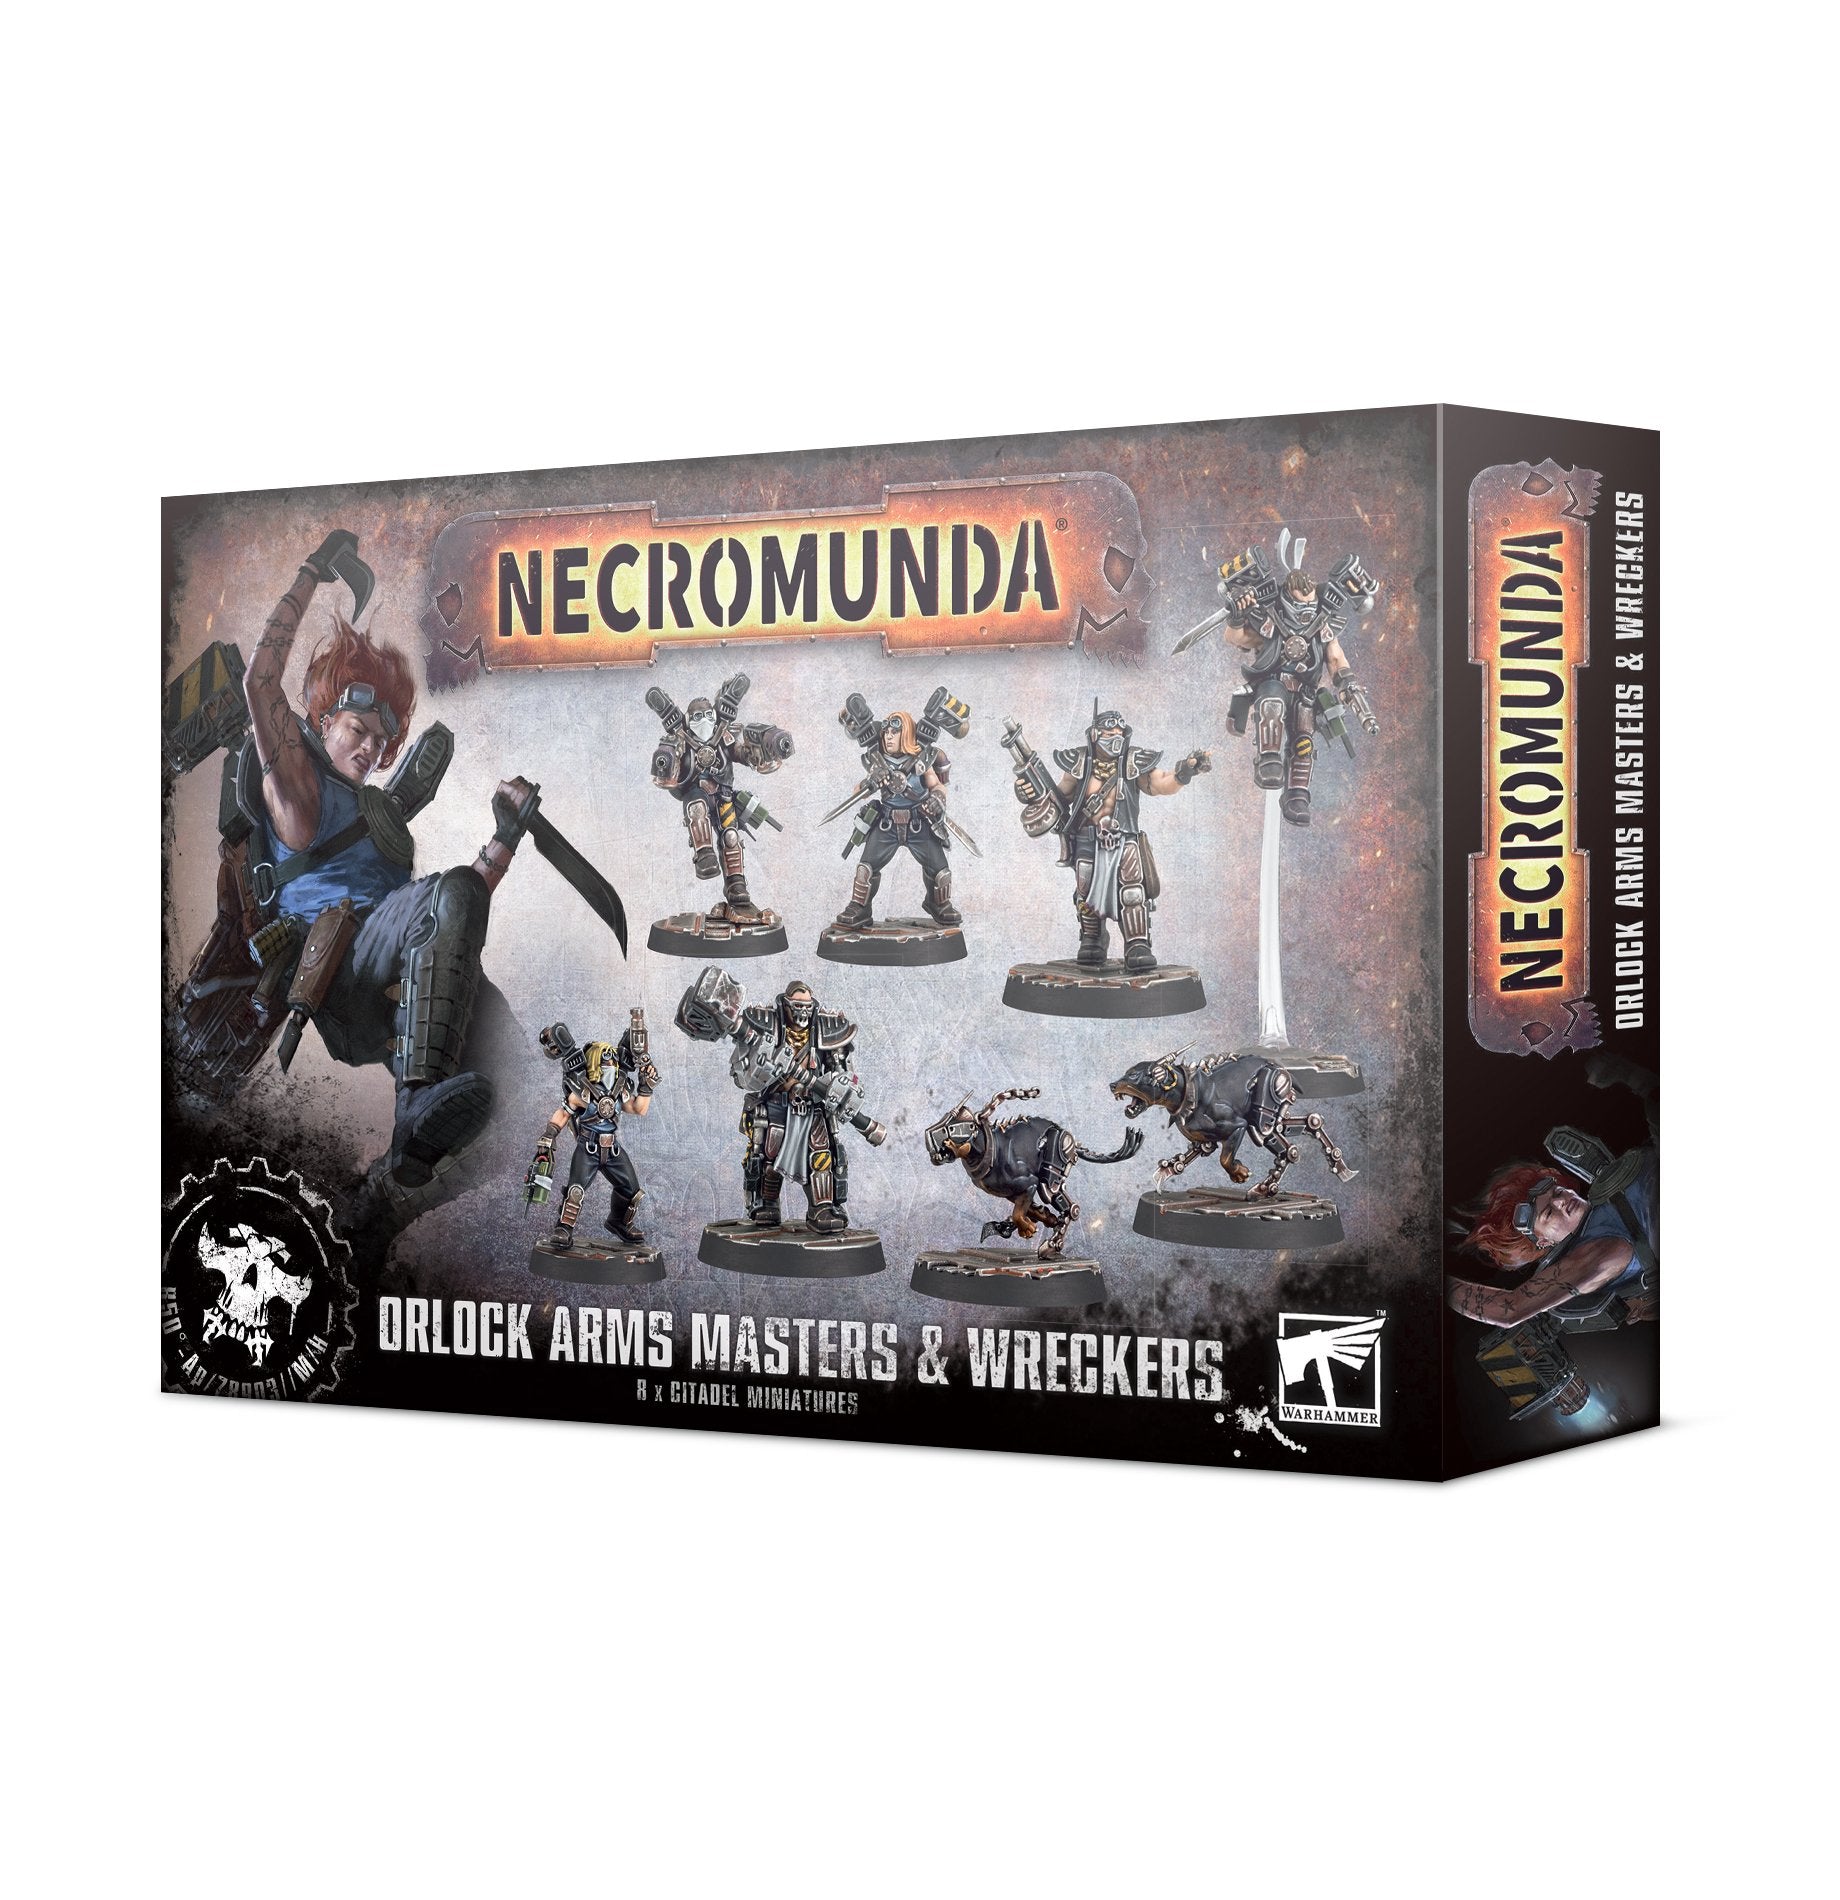 Orlock Arms Masters And Wreckers Necromunda Games Workshop   